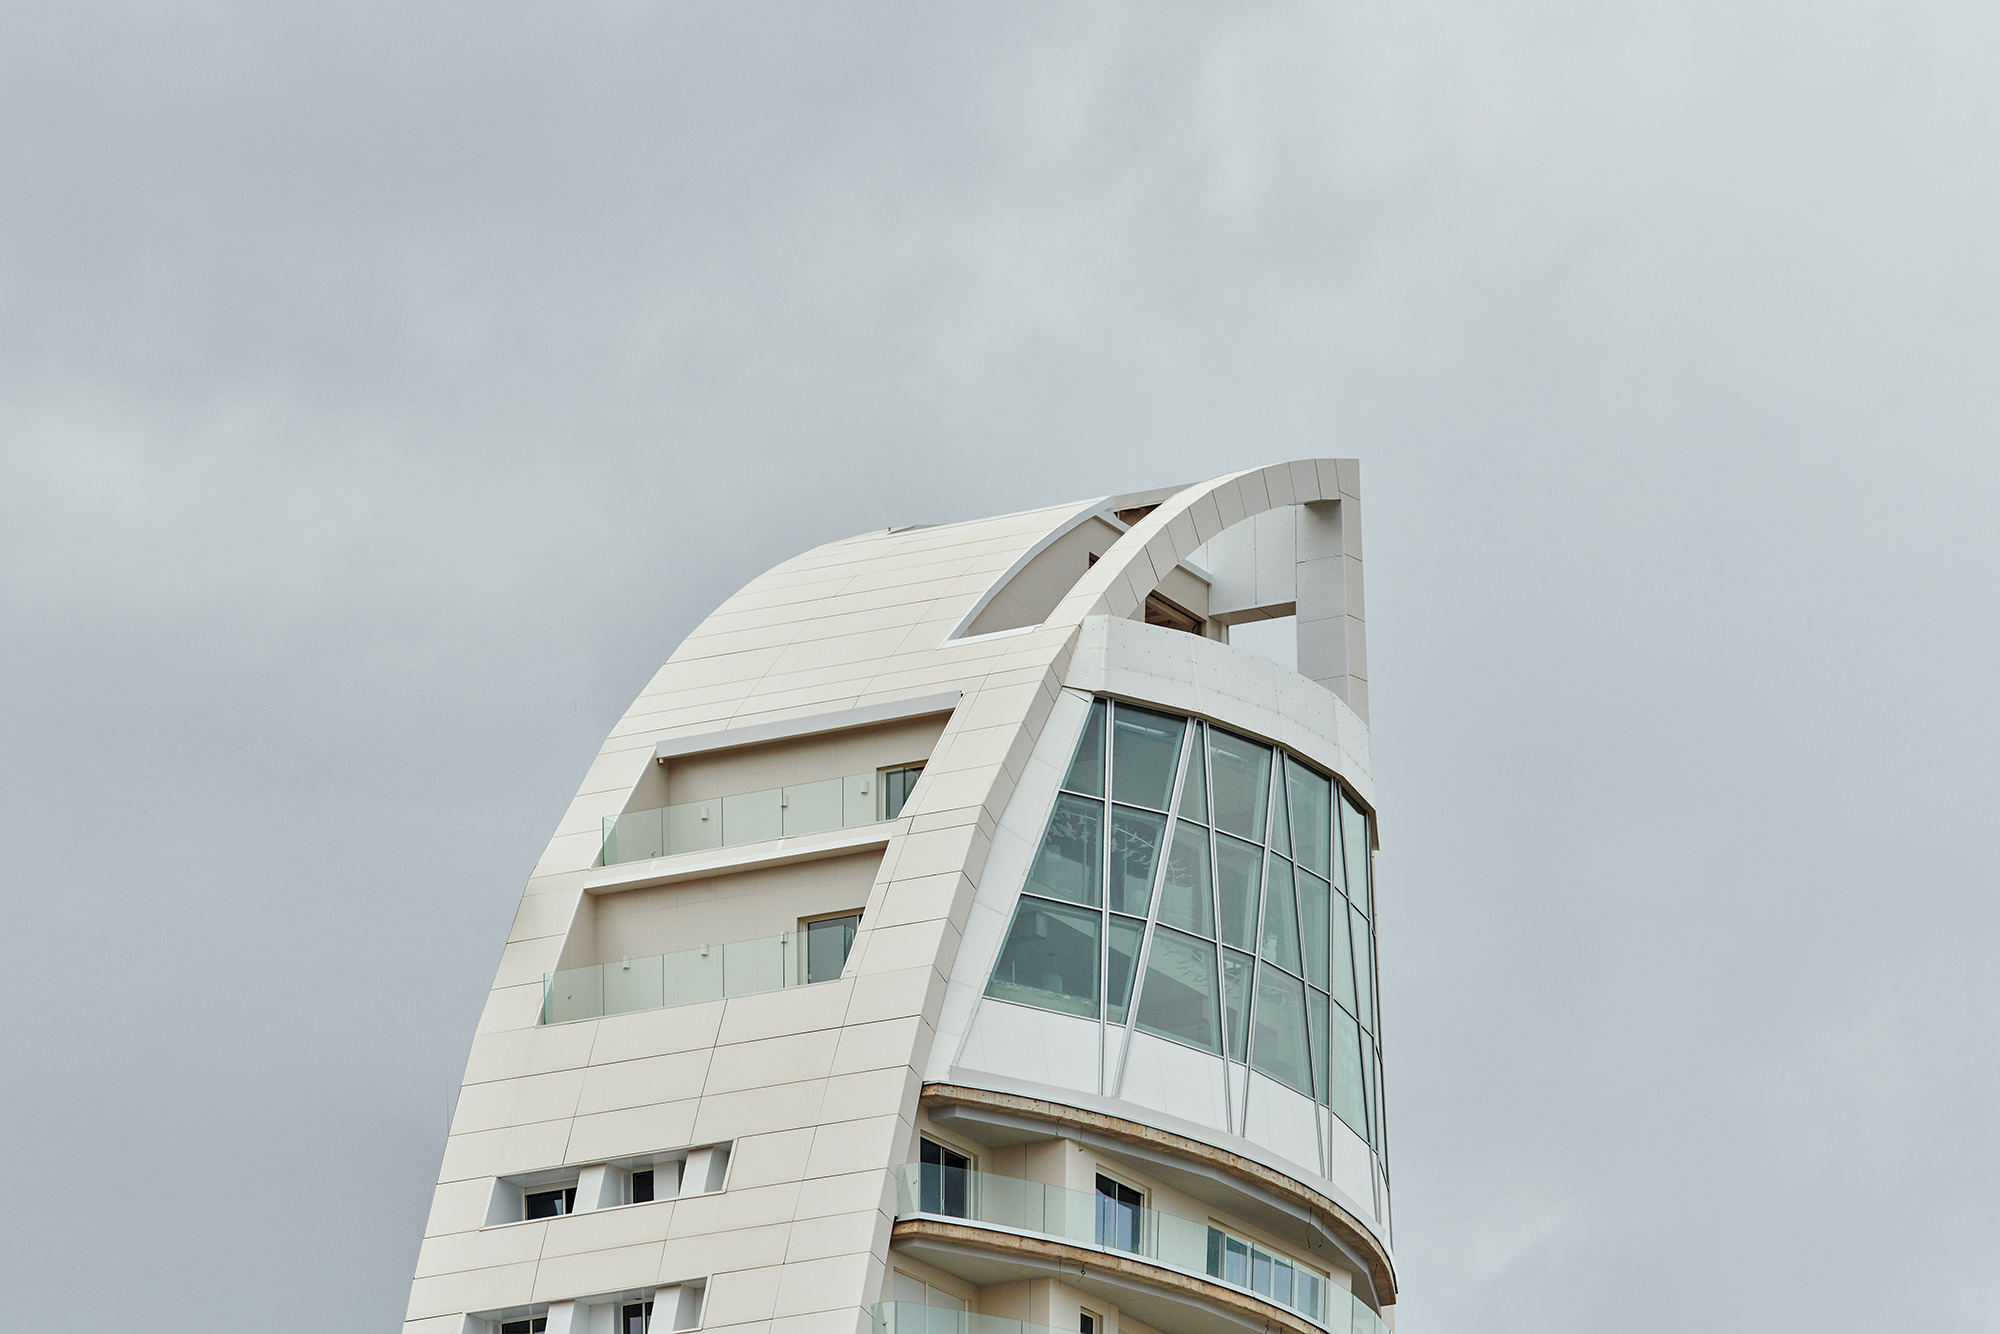 Image of delfin tower benidorm 15 in Dekton presents the world’s first curved and ventilated façade made of ultra-compact stone - Cosentino